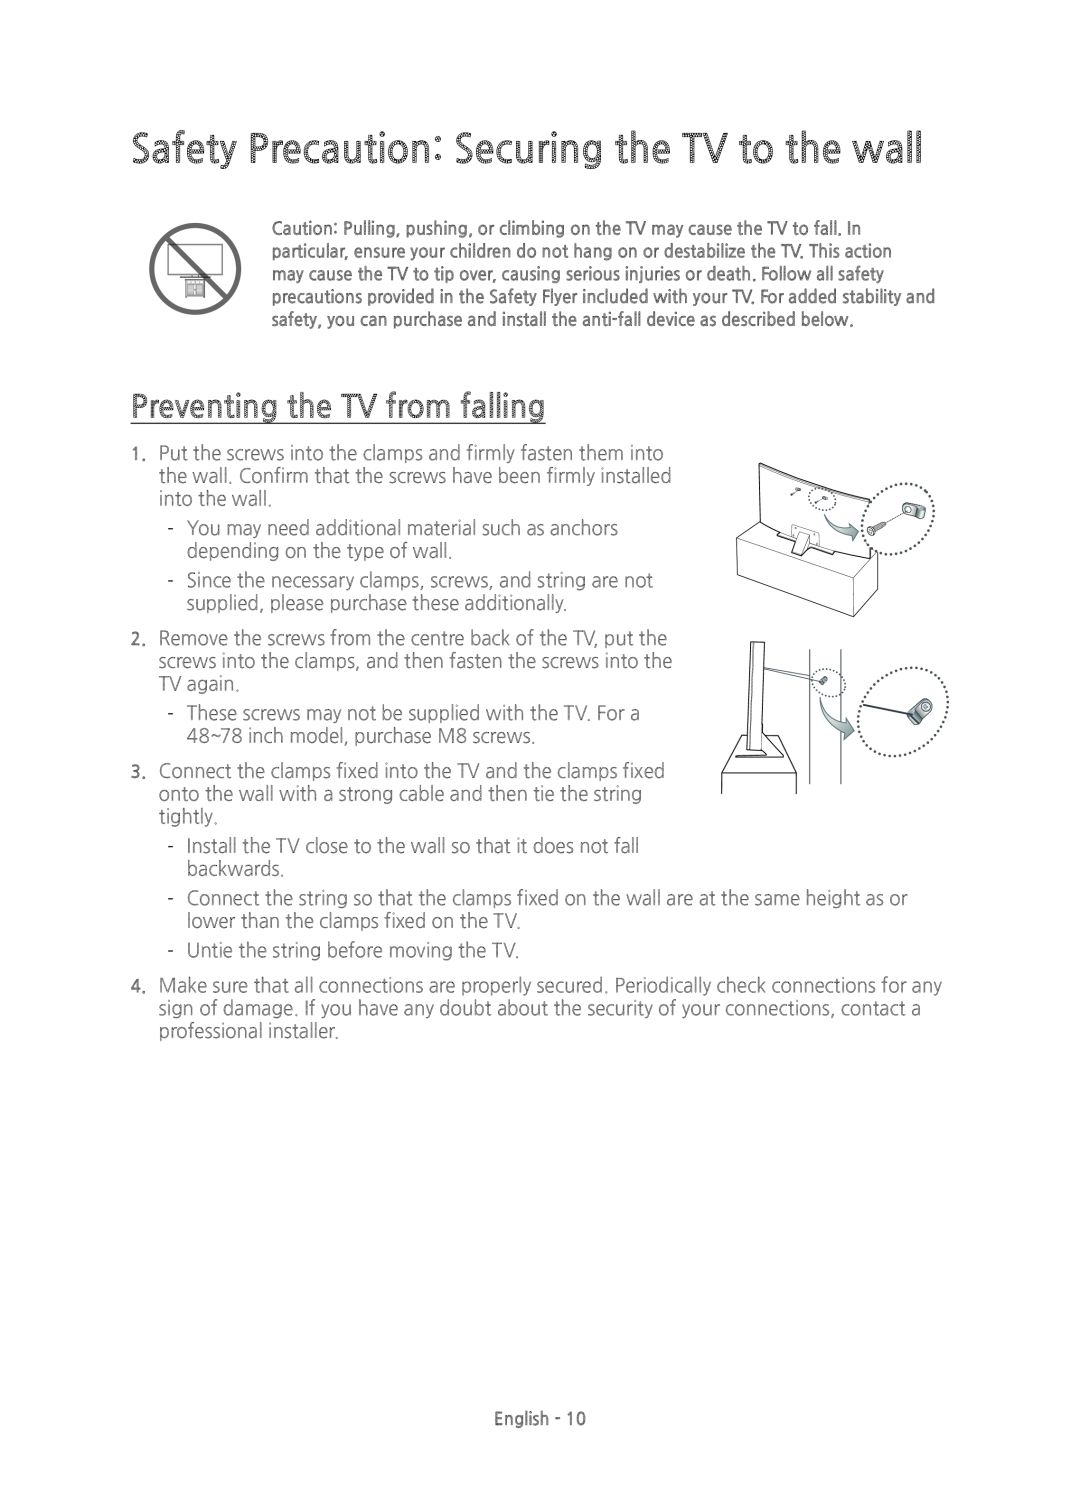 Samsung UE78JU7500TXXC, UE48JU7500TXXC manual Safety Precaution Securing the TV to the wall, Preventing the TV from falling 